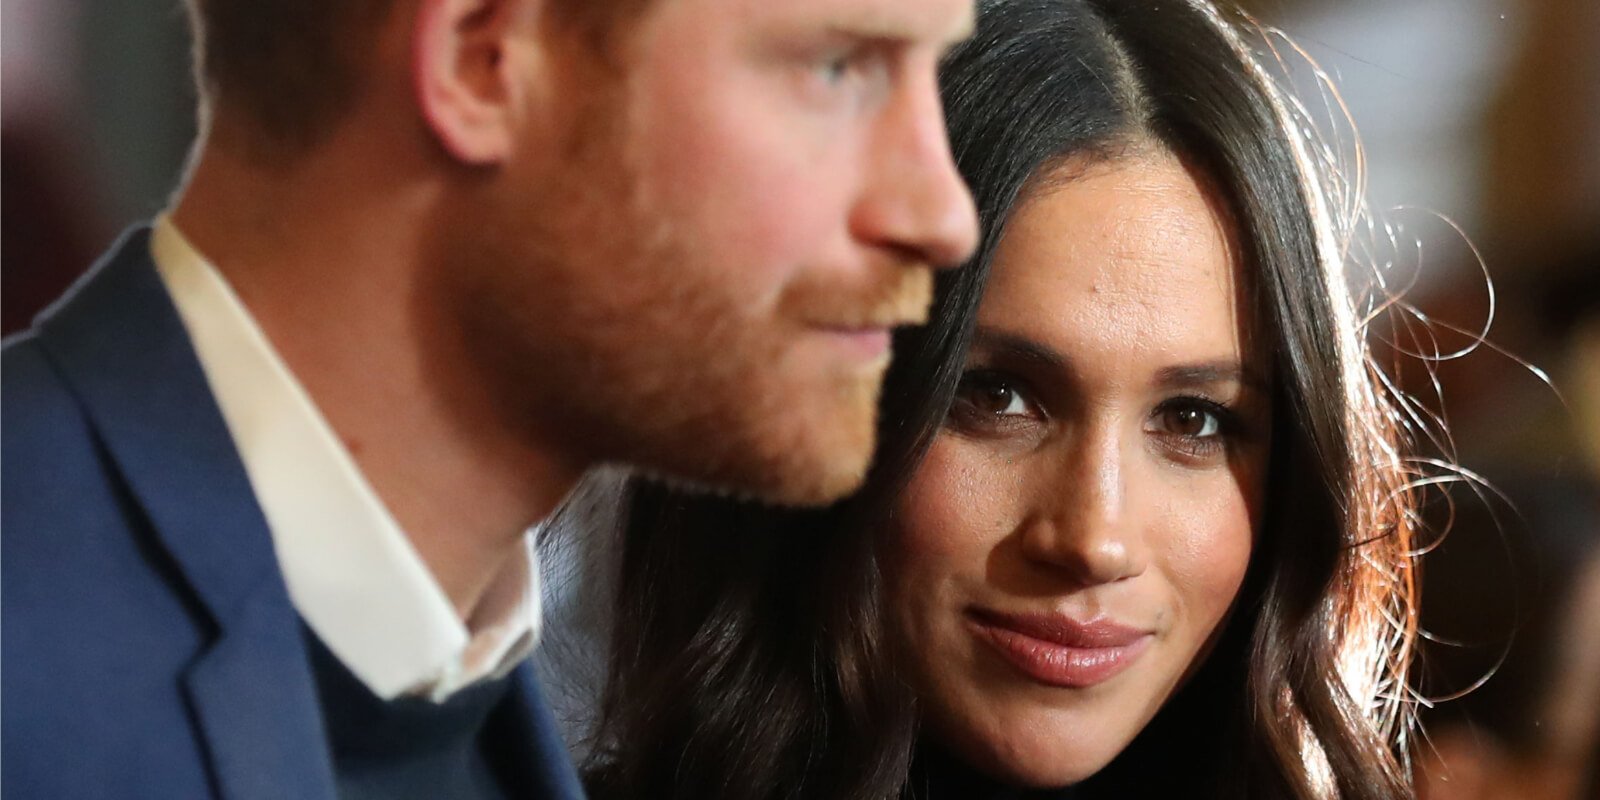 Meghan Markle has made her position with the royal family 'pretty damn obvious' says royal commentator.